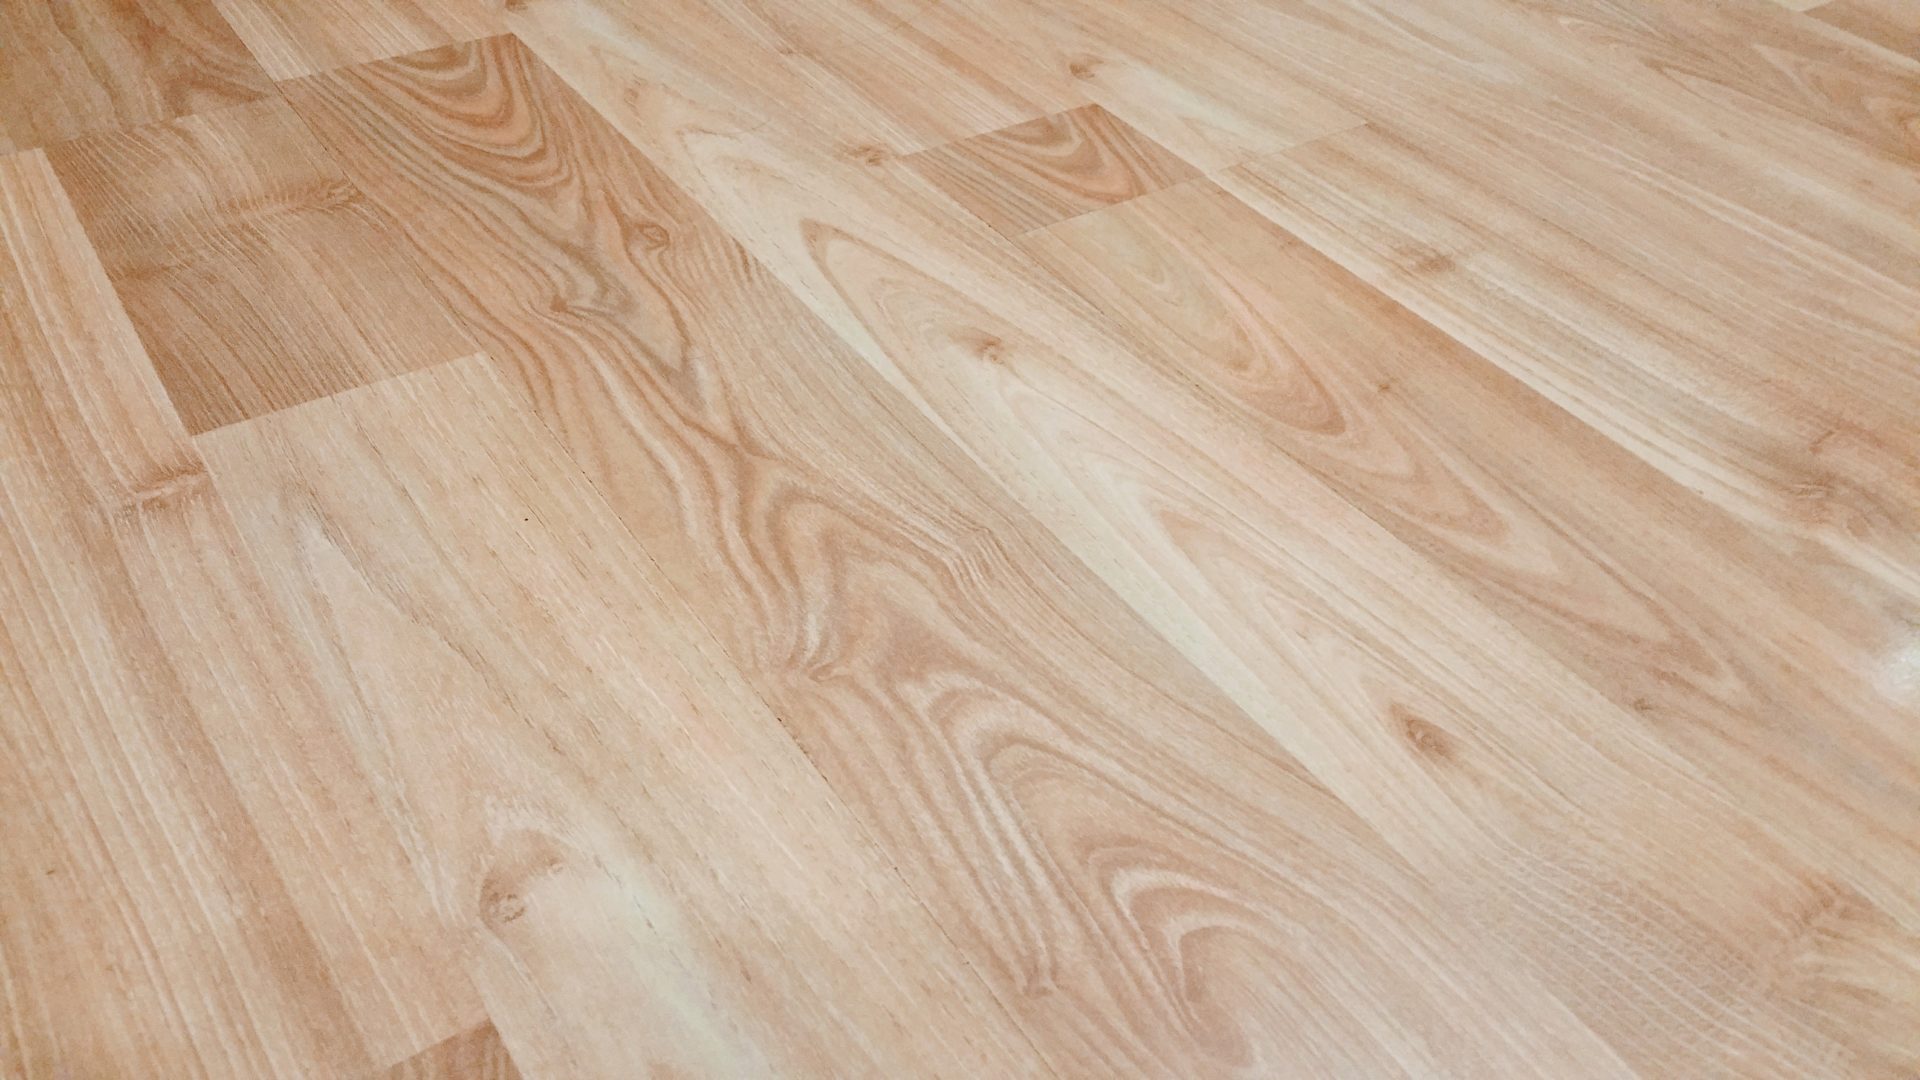 What wooden flooring costs? Even if you have no idea what you want.